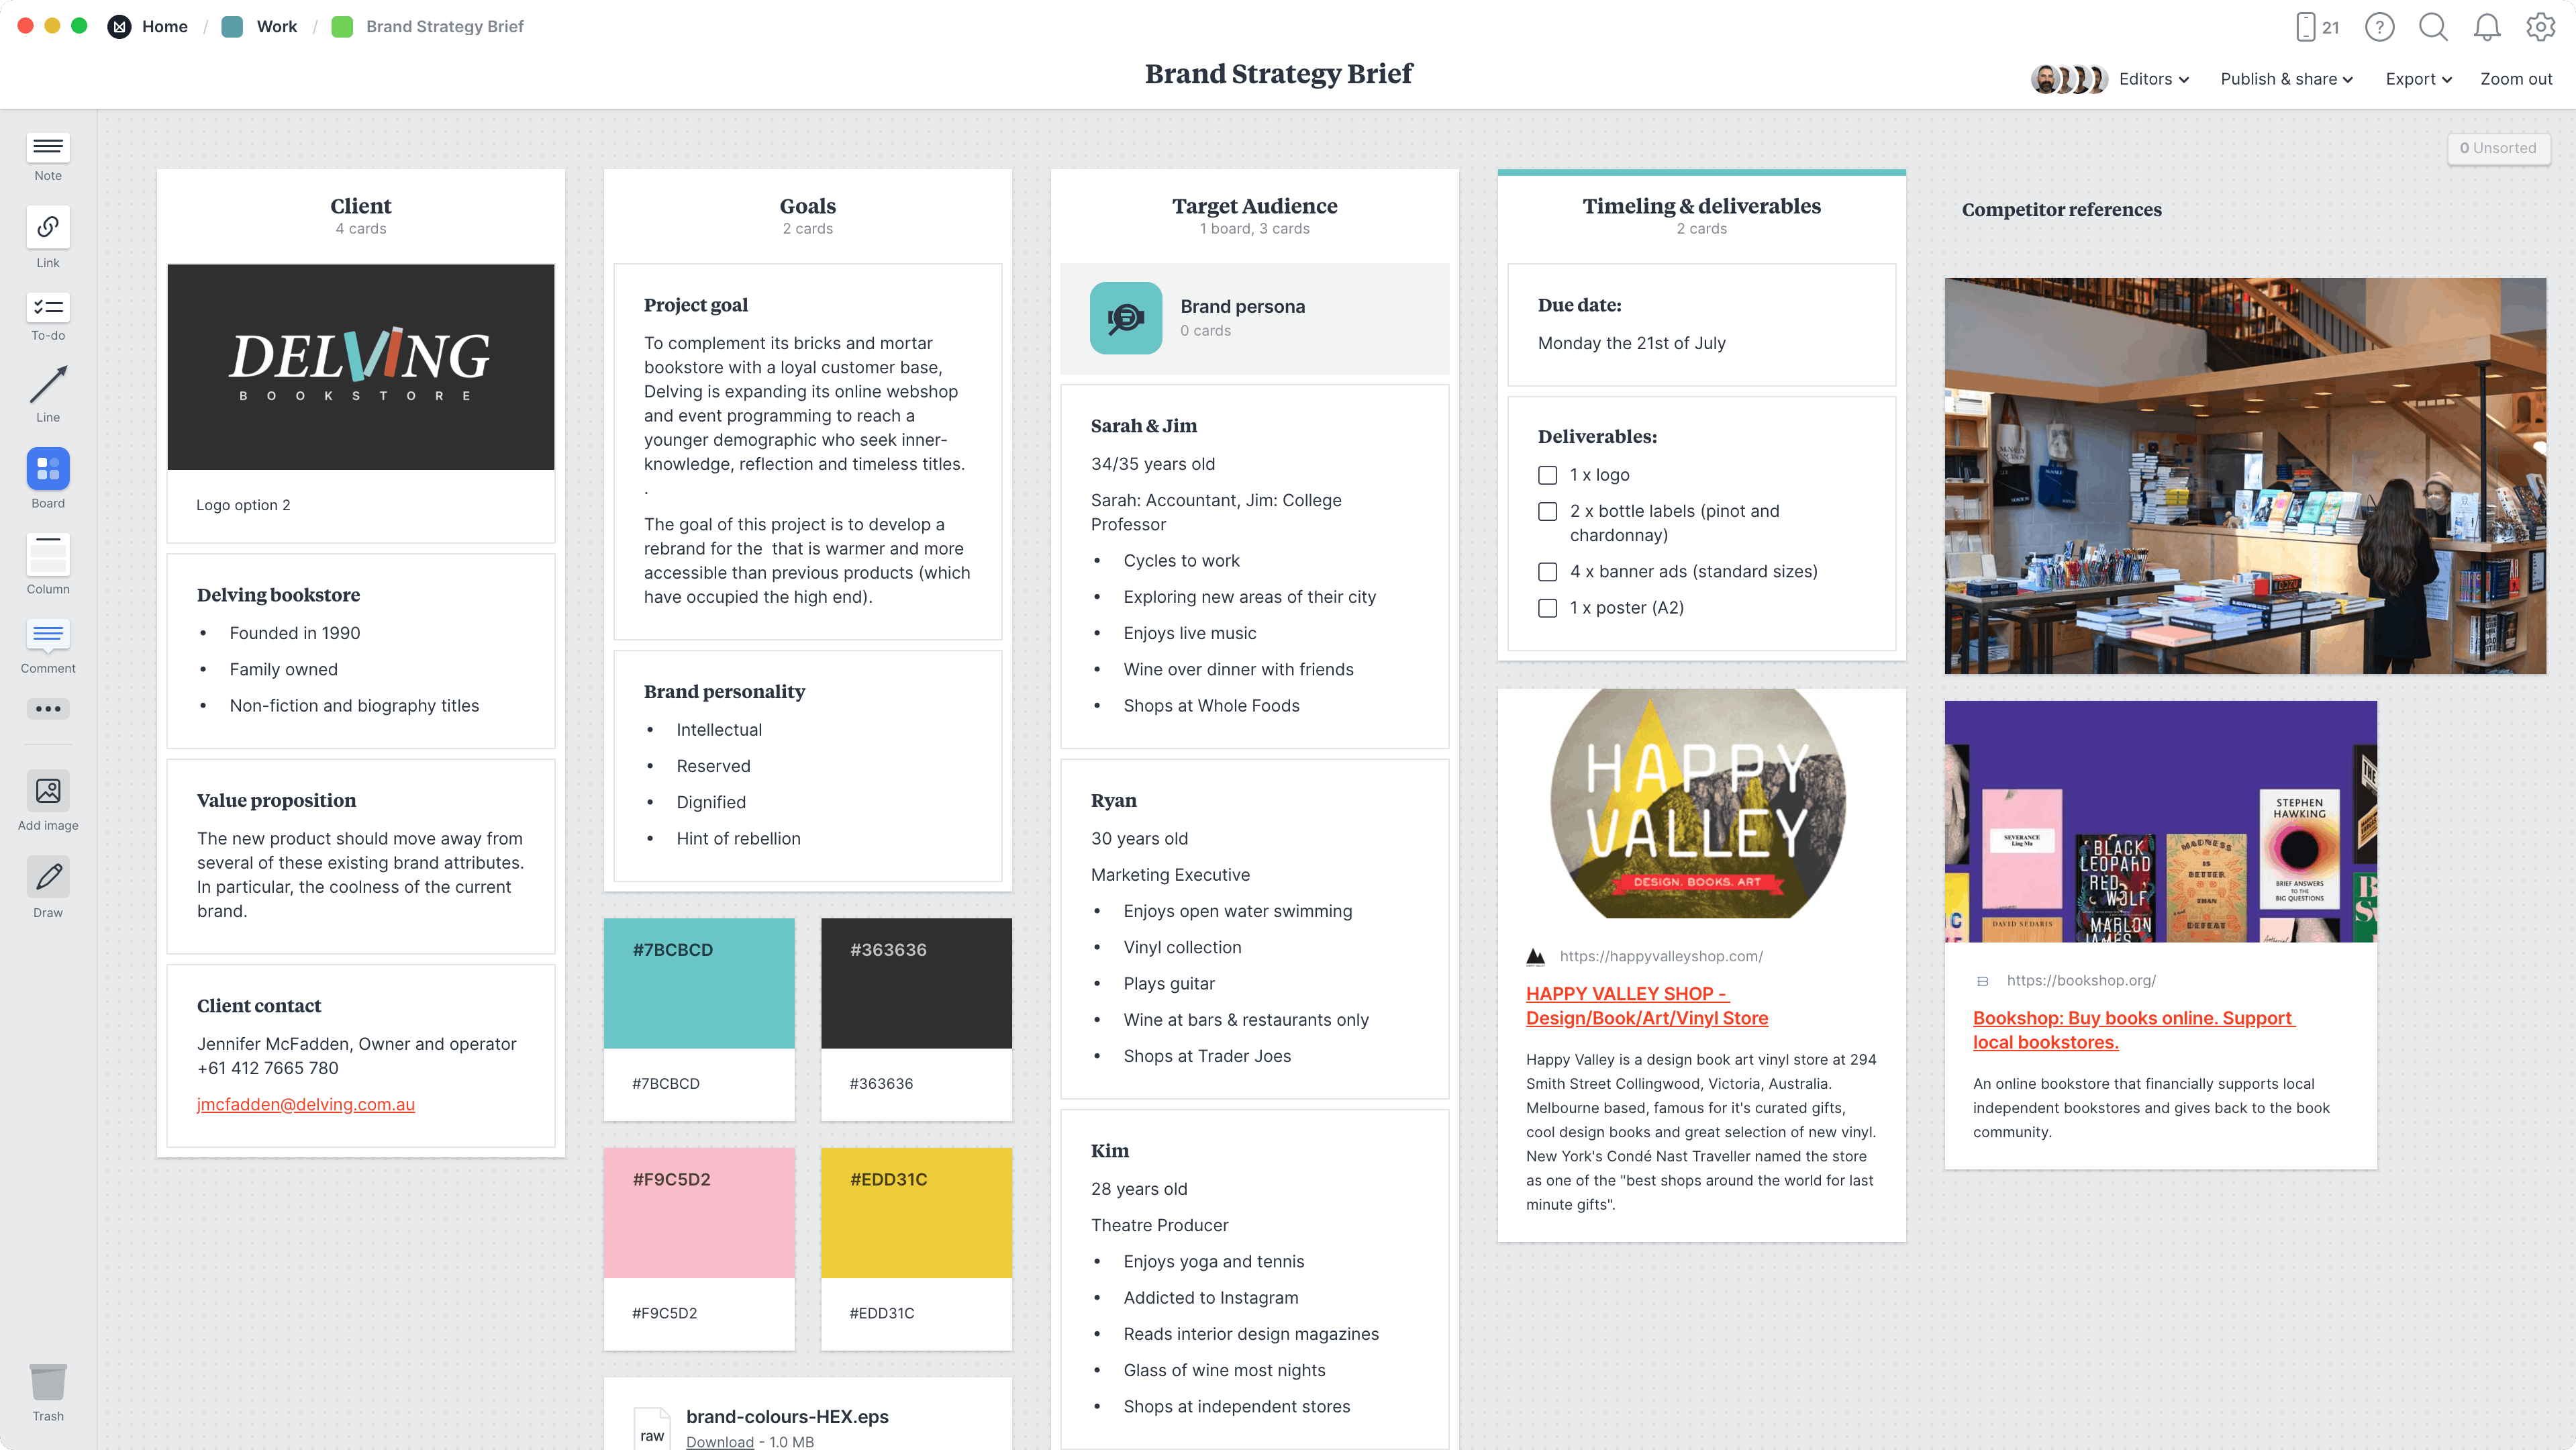 Brand Strategy Brief Template & Example - Milanote